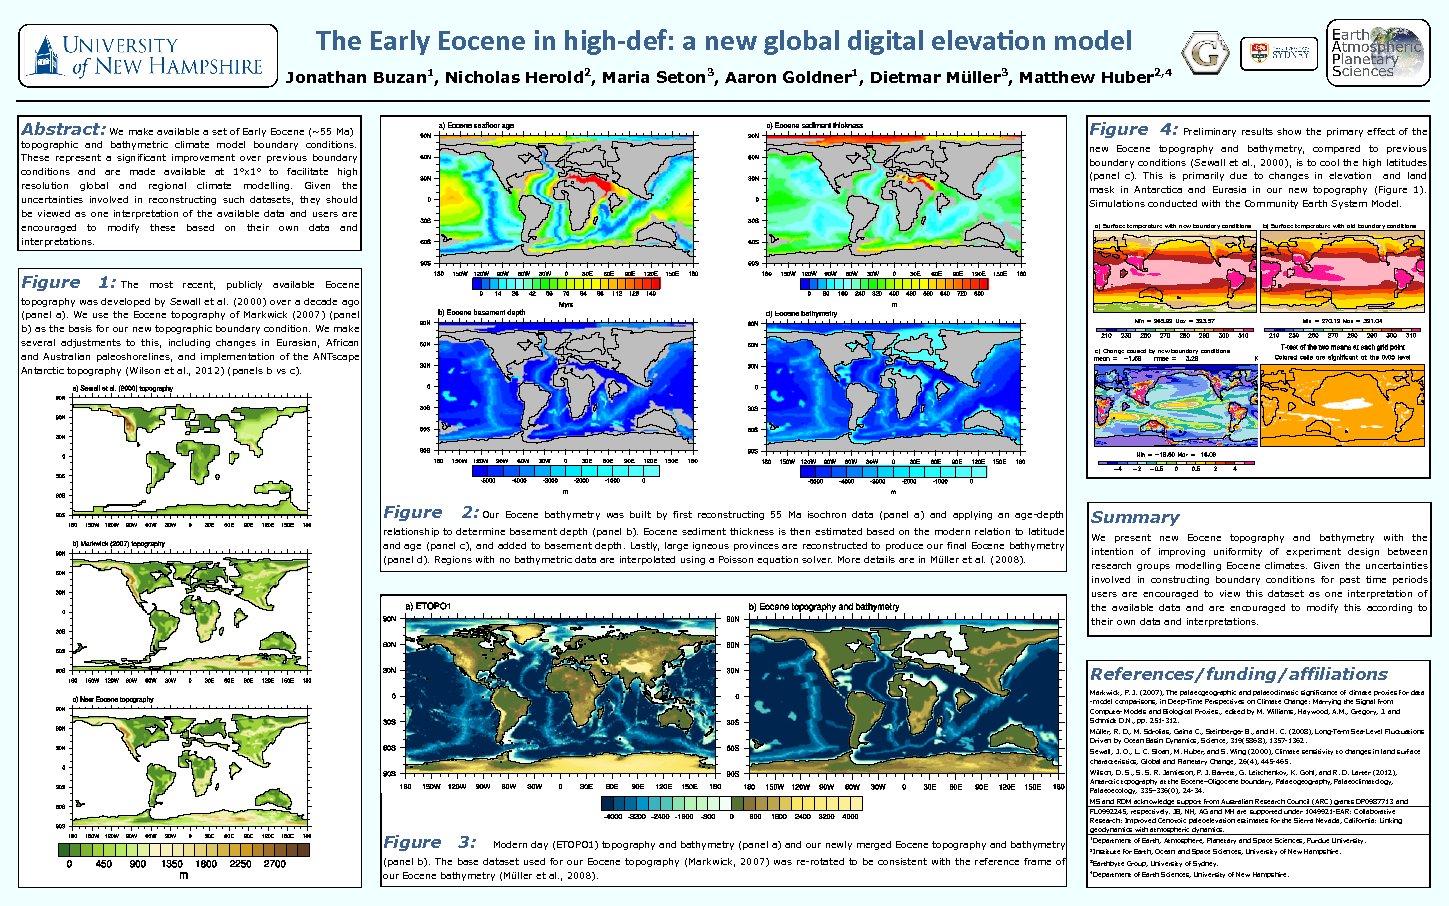 The Early Eocene In High-Def: A New Global Digital Elevation Model by heroldn